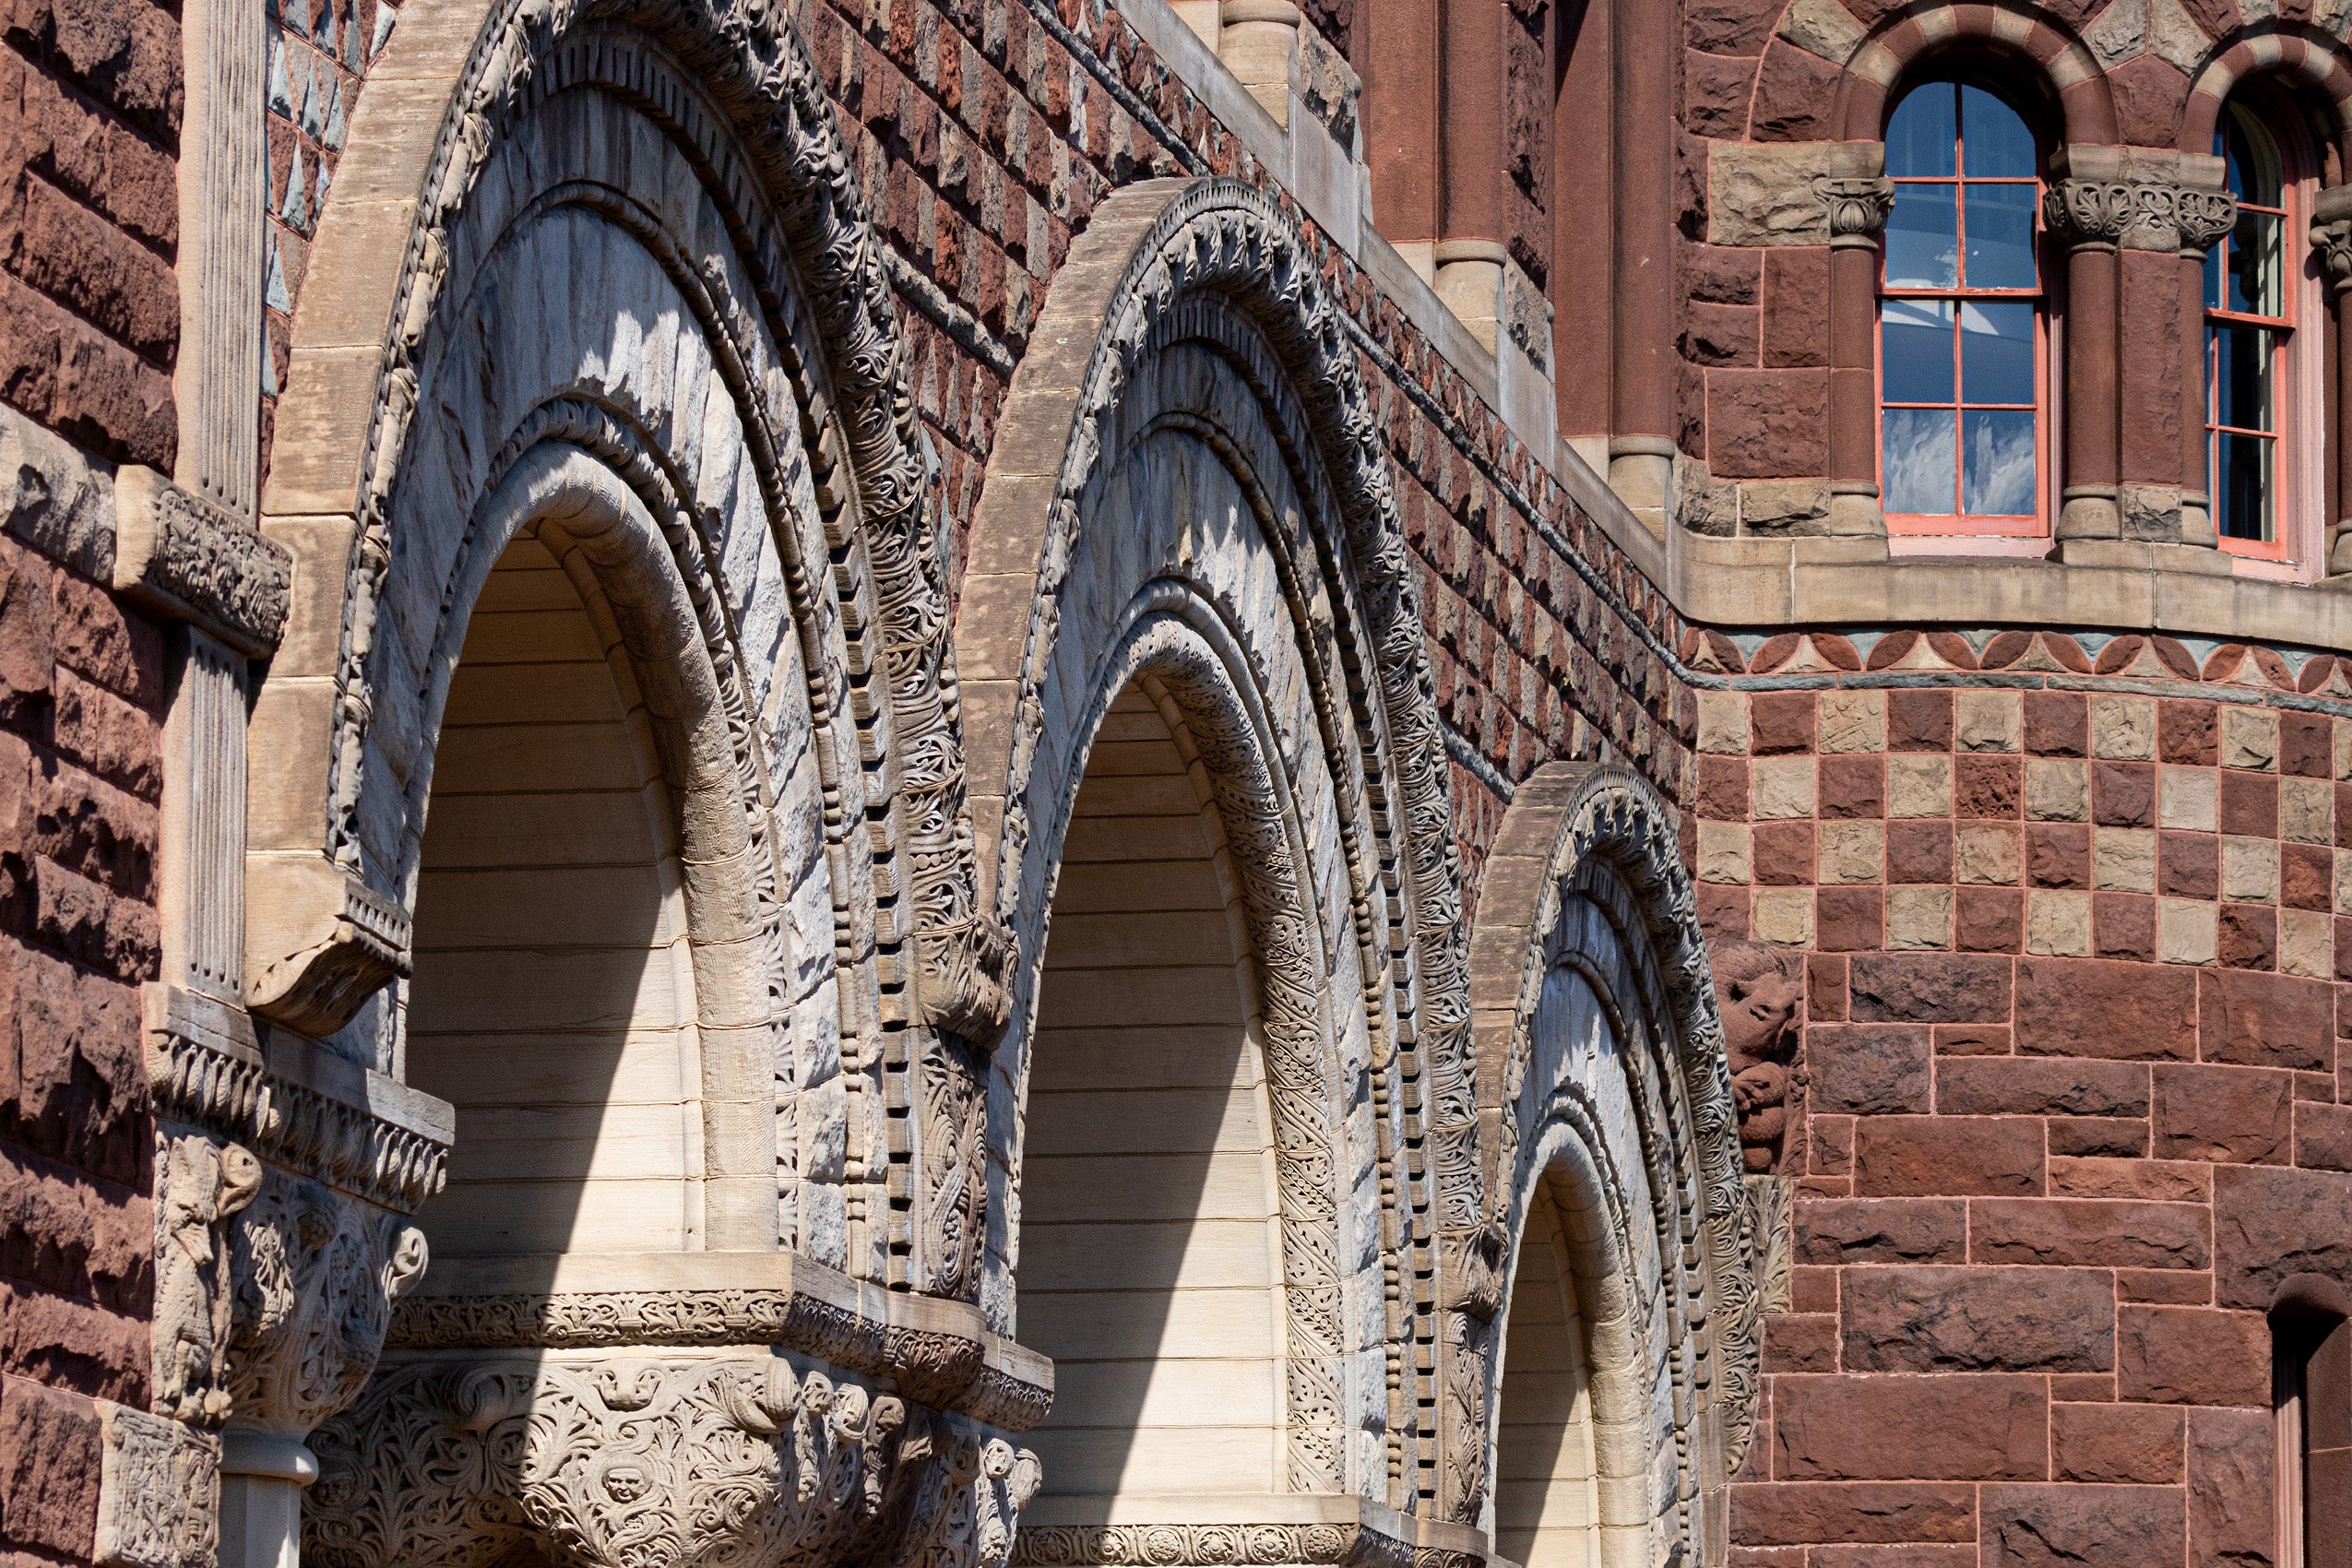 Austin Hall arches from an angle